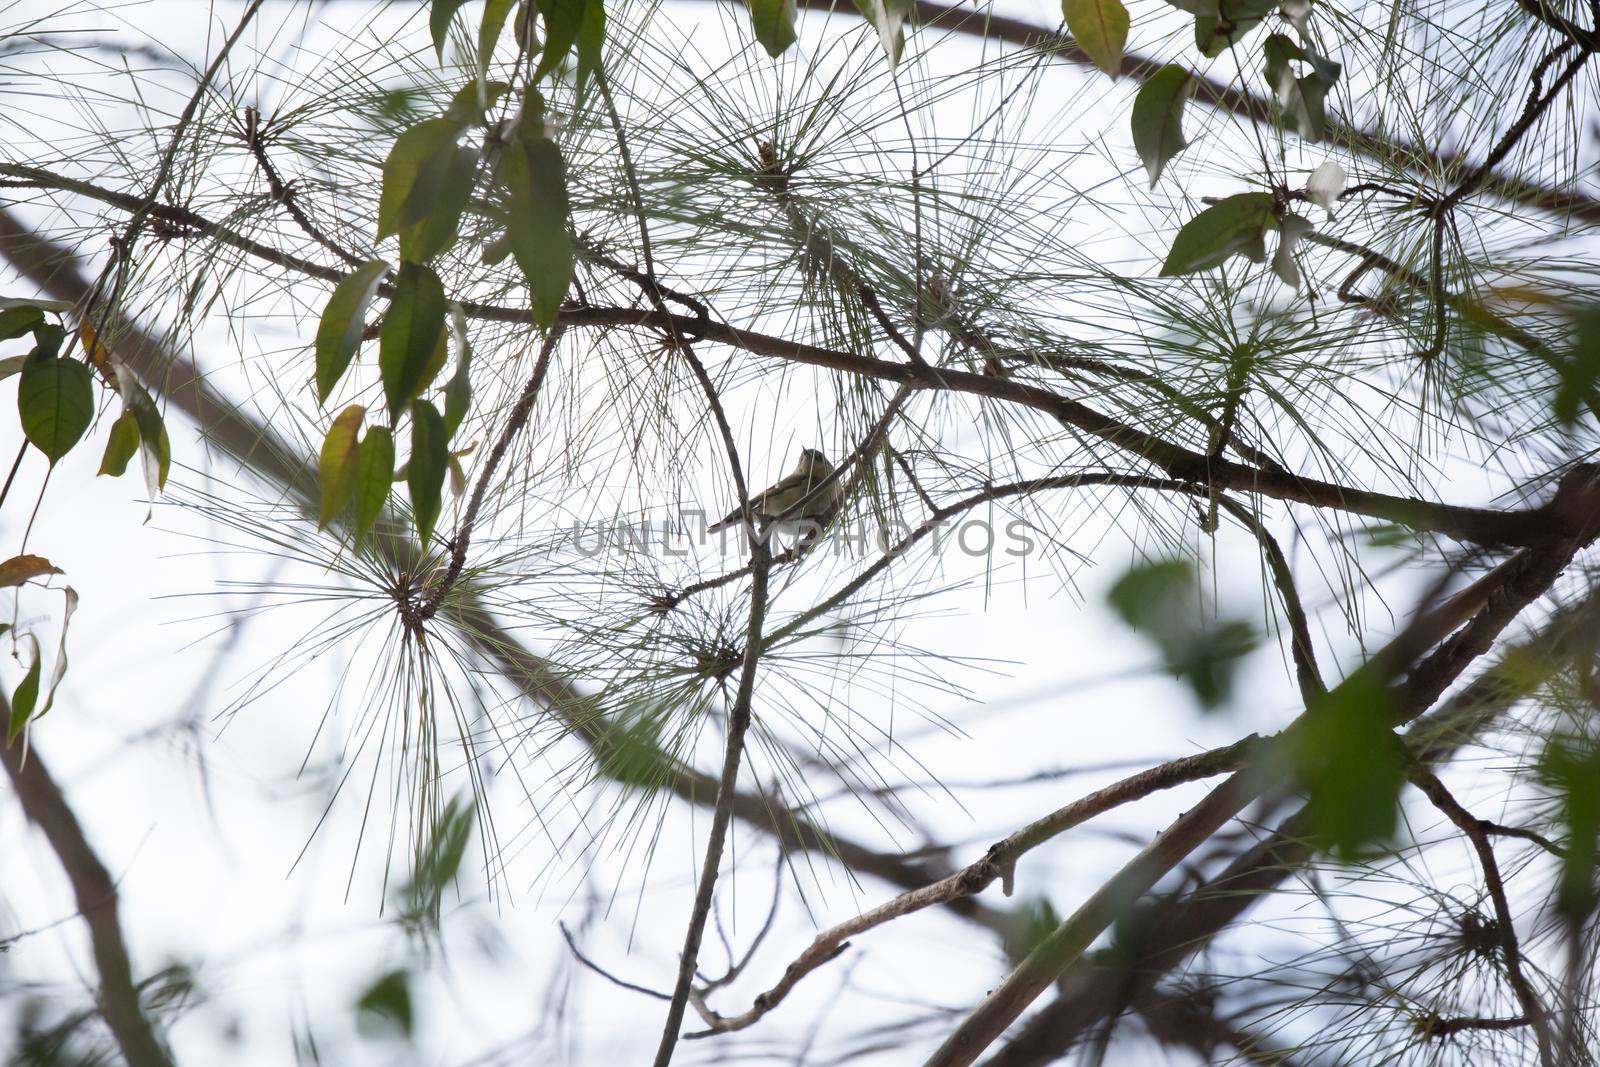 Ruby-crowned kinglet (Regulus calendula) looking from behind pine needles on an overcast day